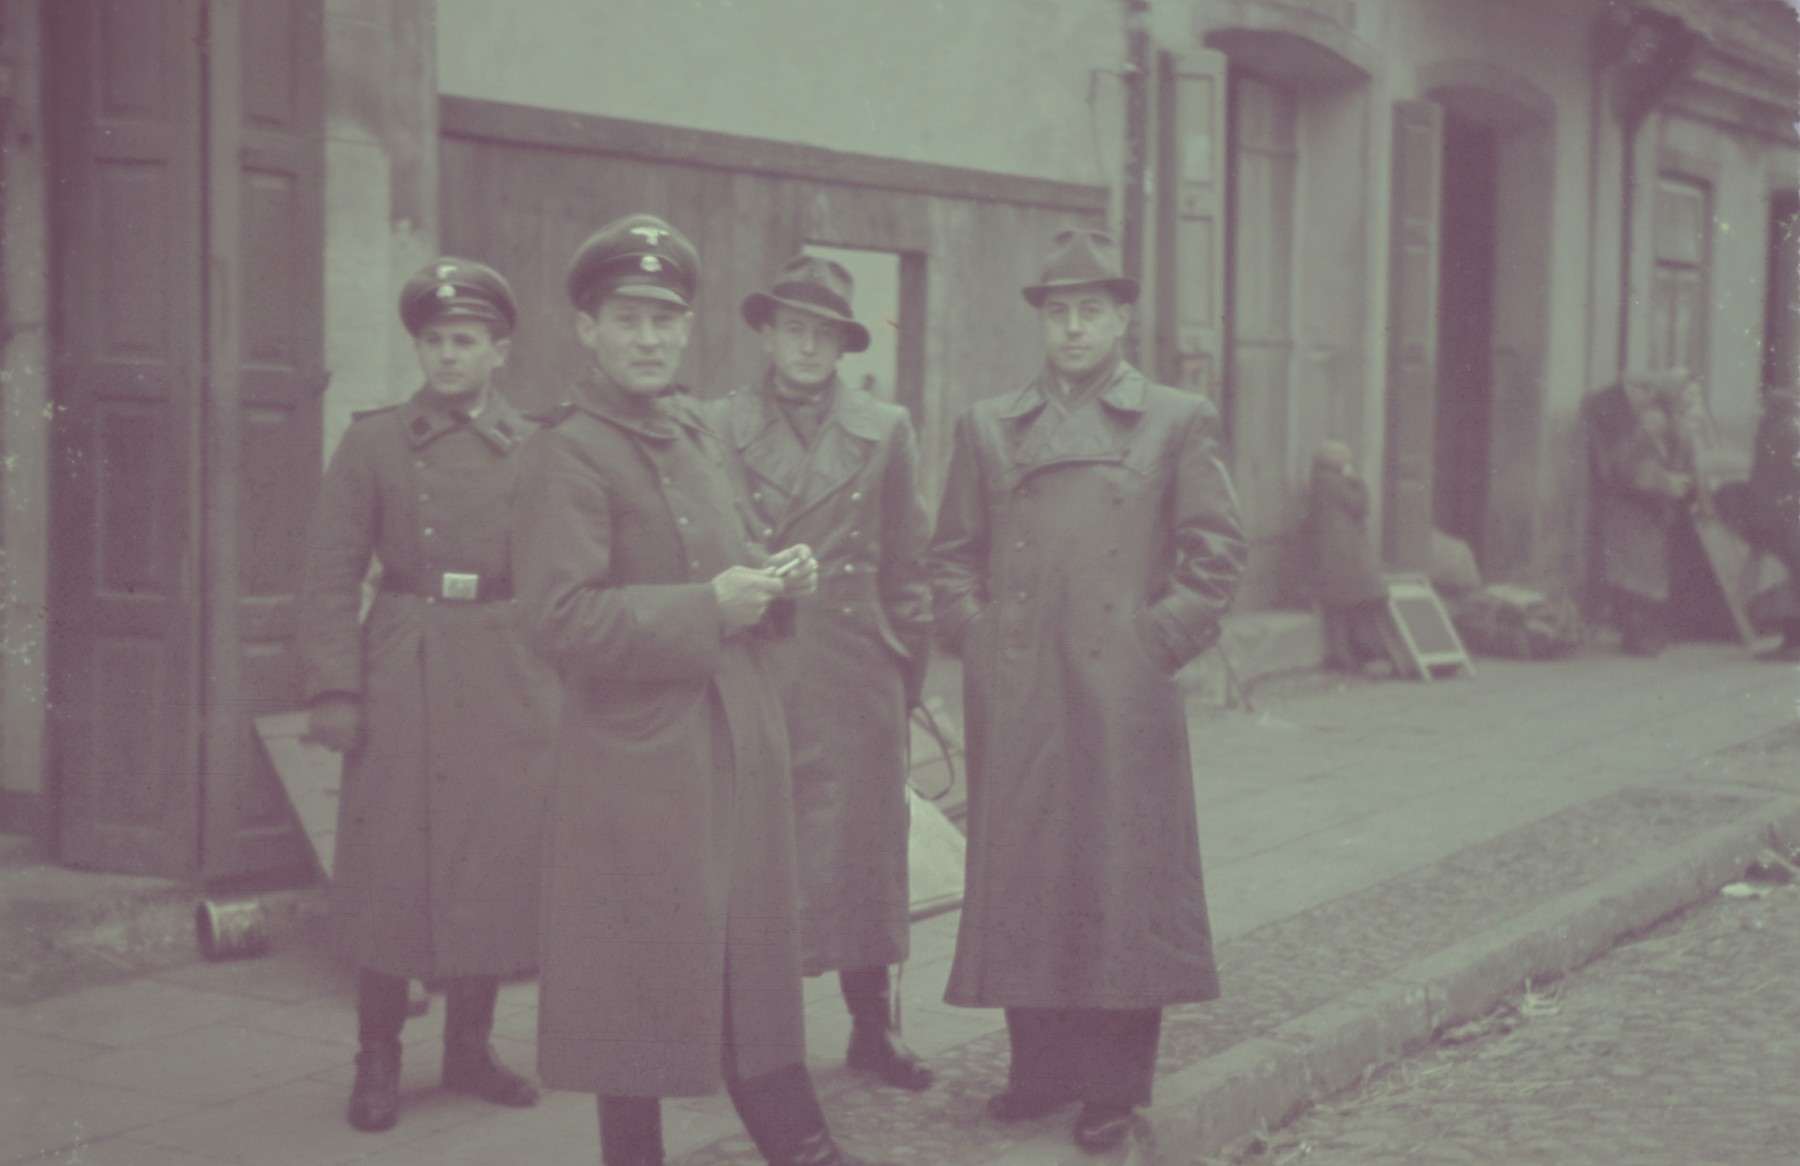 Two SS men gather with two other Germans on a street in the Lodz ghetto.